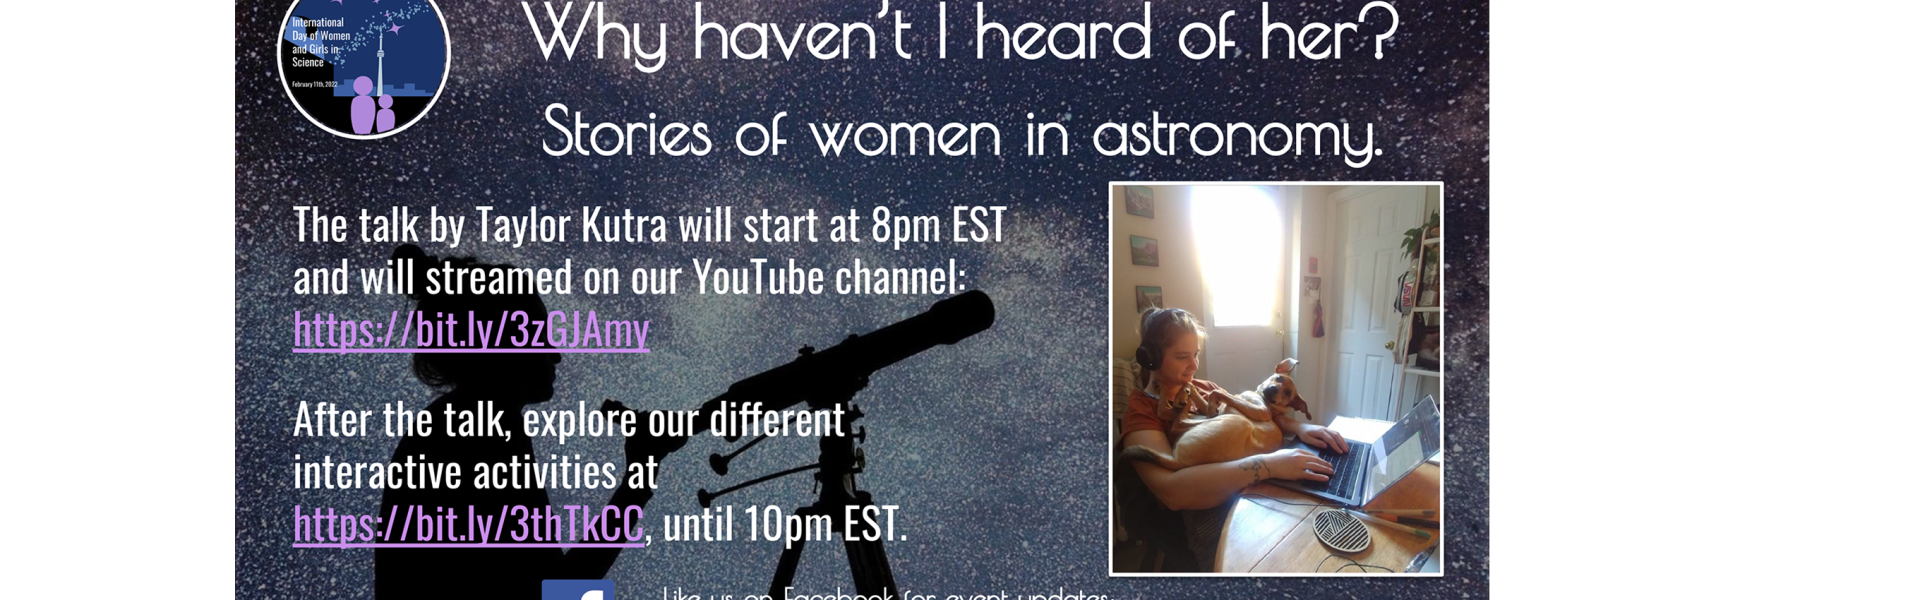 Why haven’t I heard of her? Stories of women in astronomy.